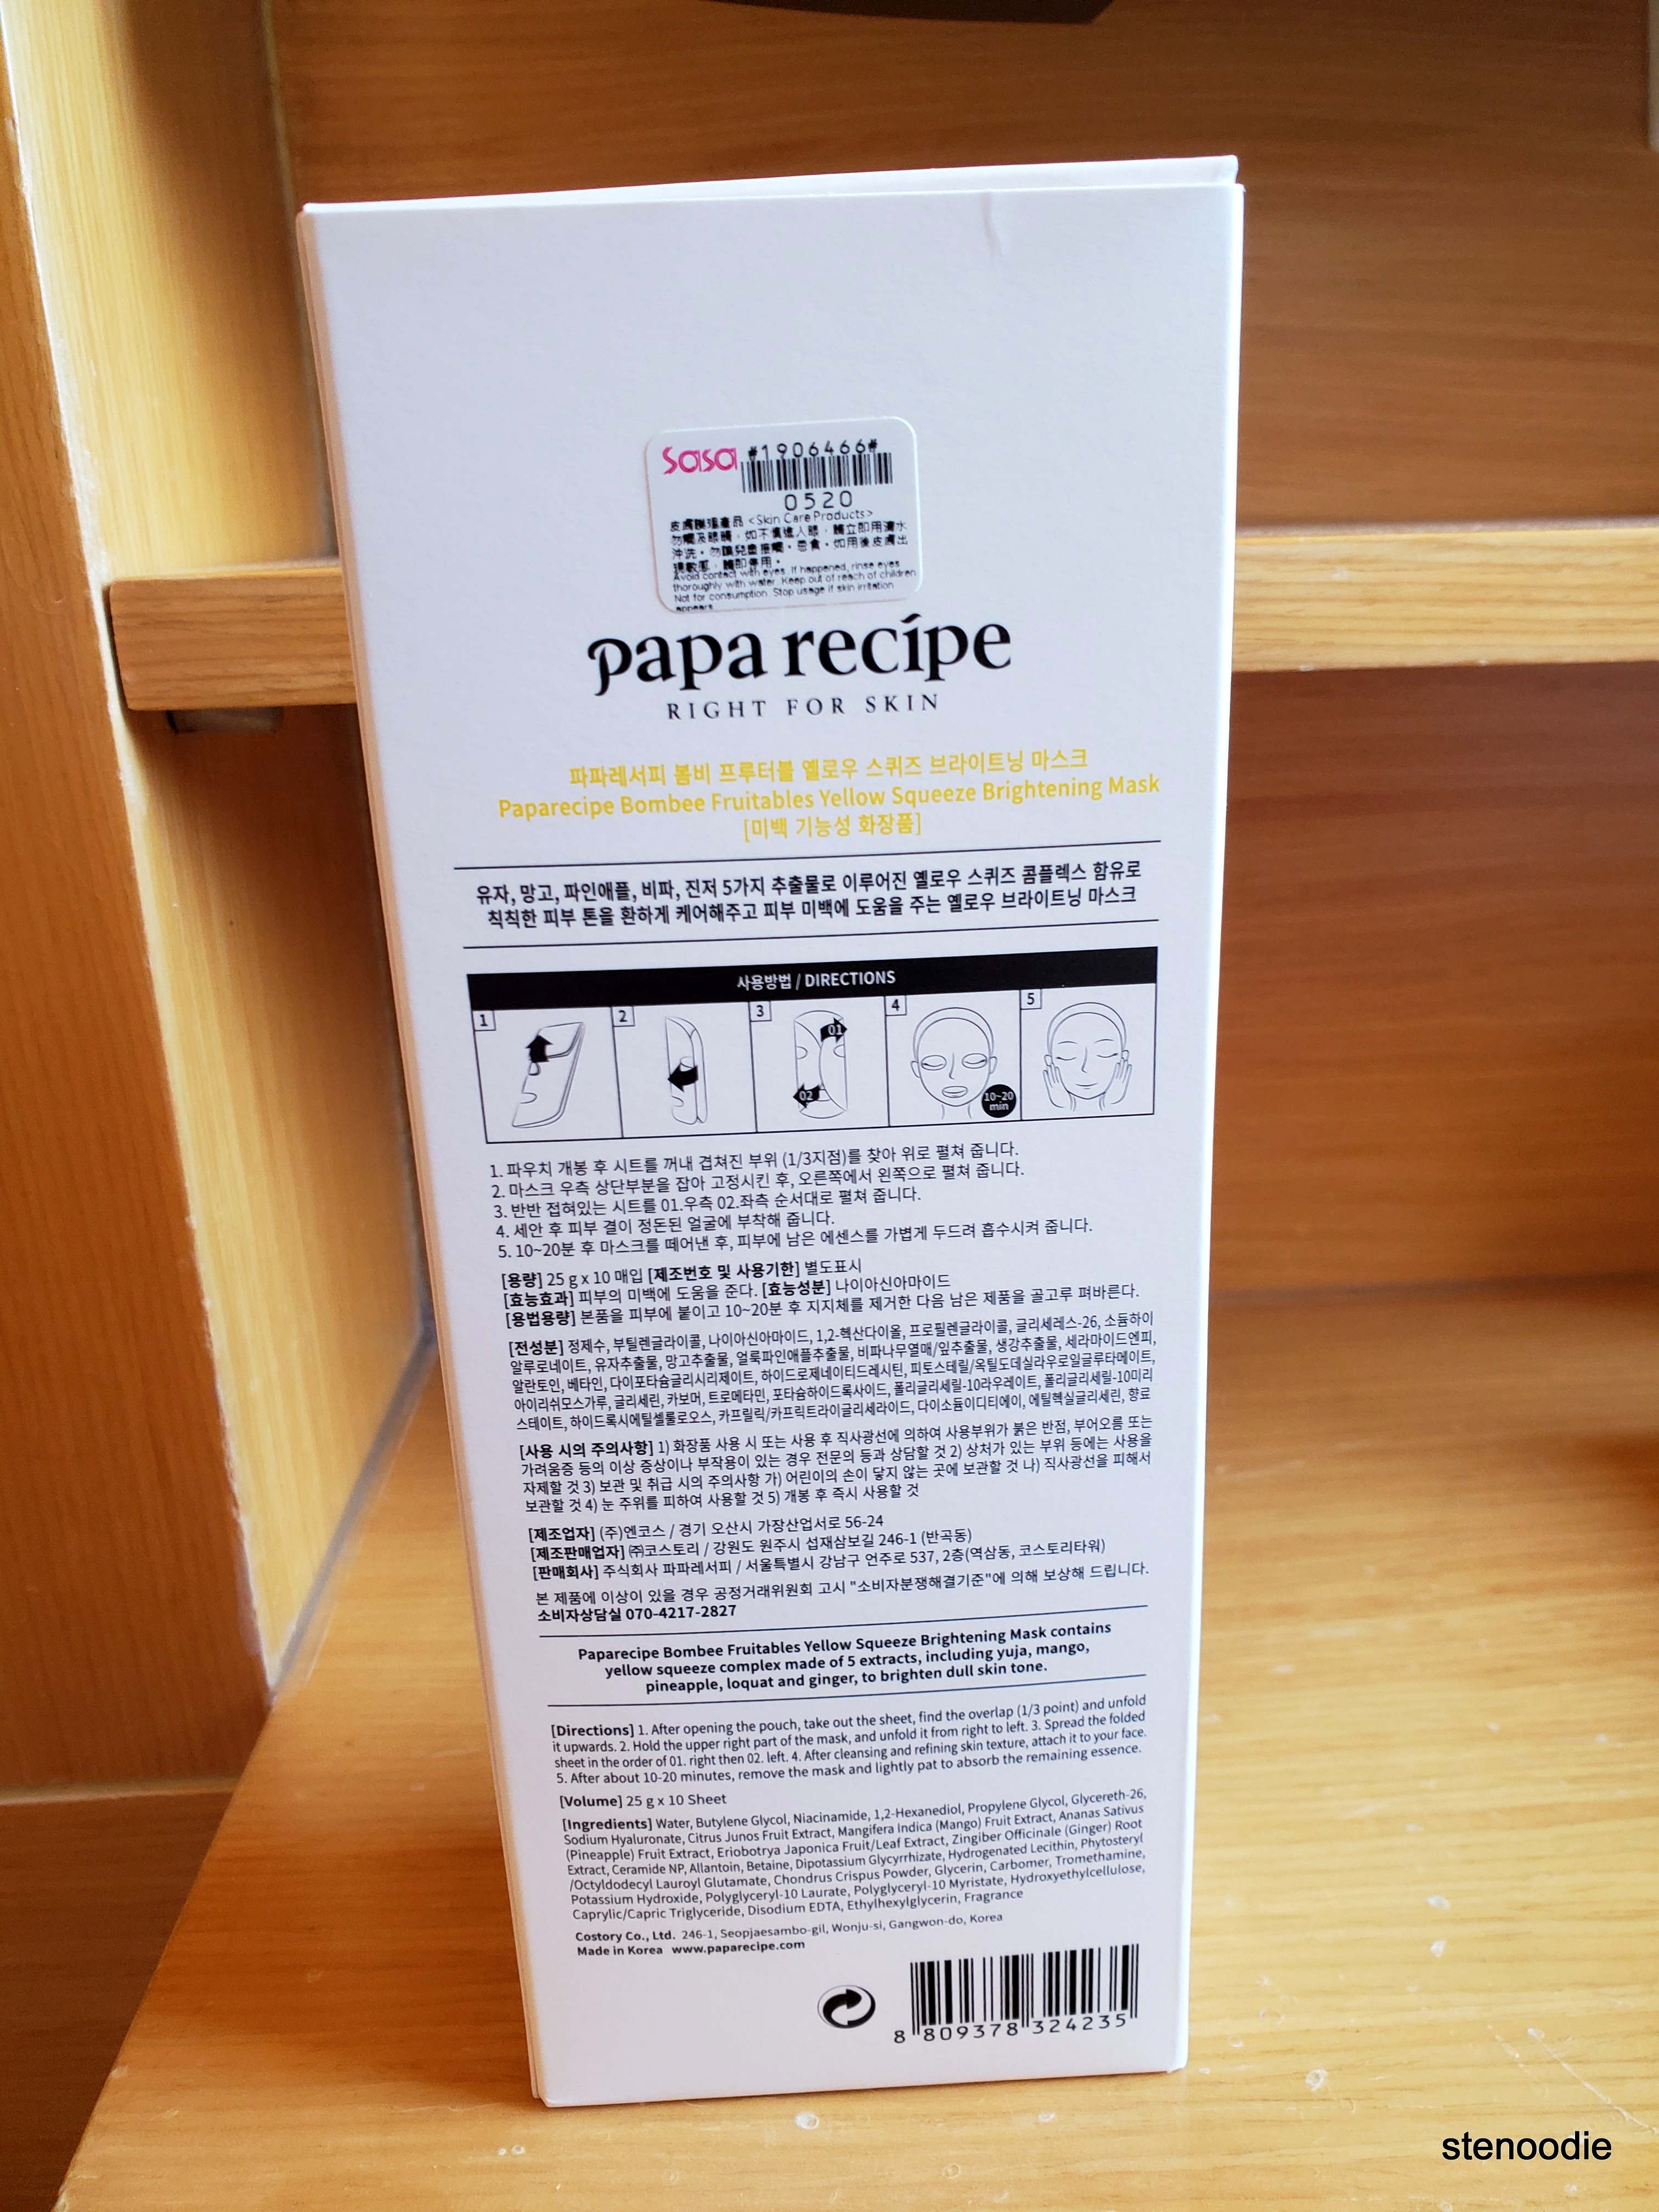 Papa Recipe Bombee Fruitables "Yellow Squeeze Brightening Mask"